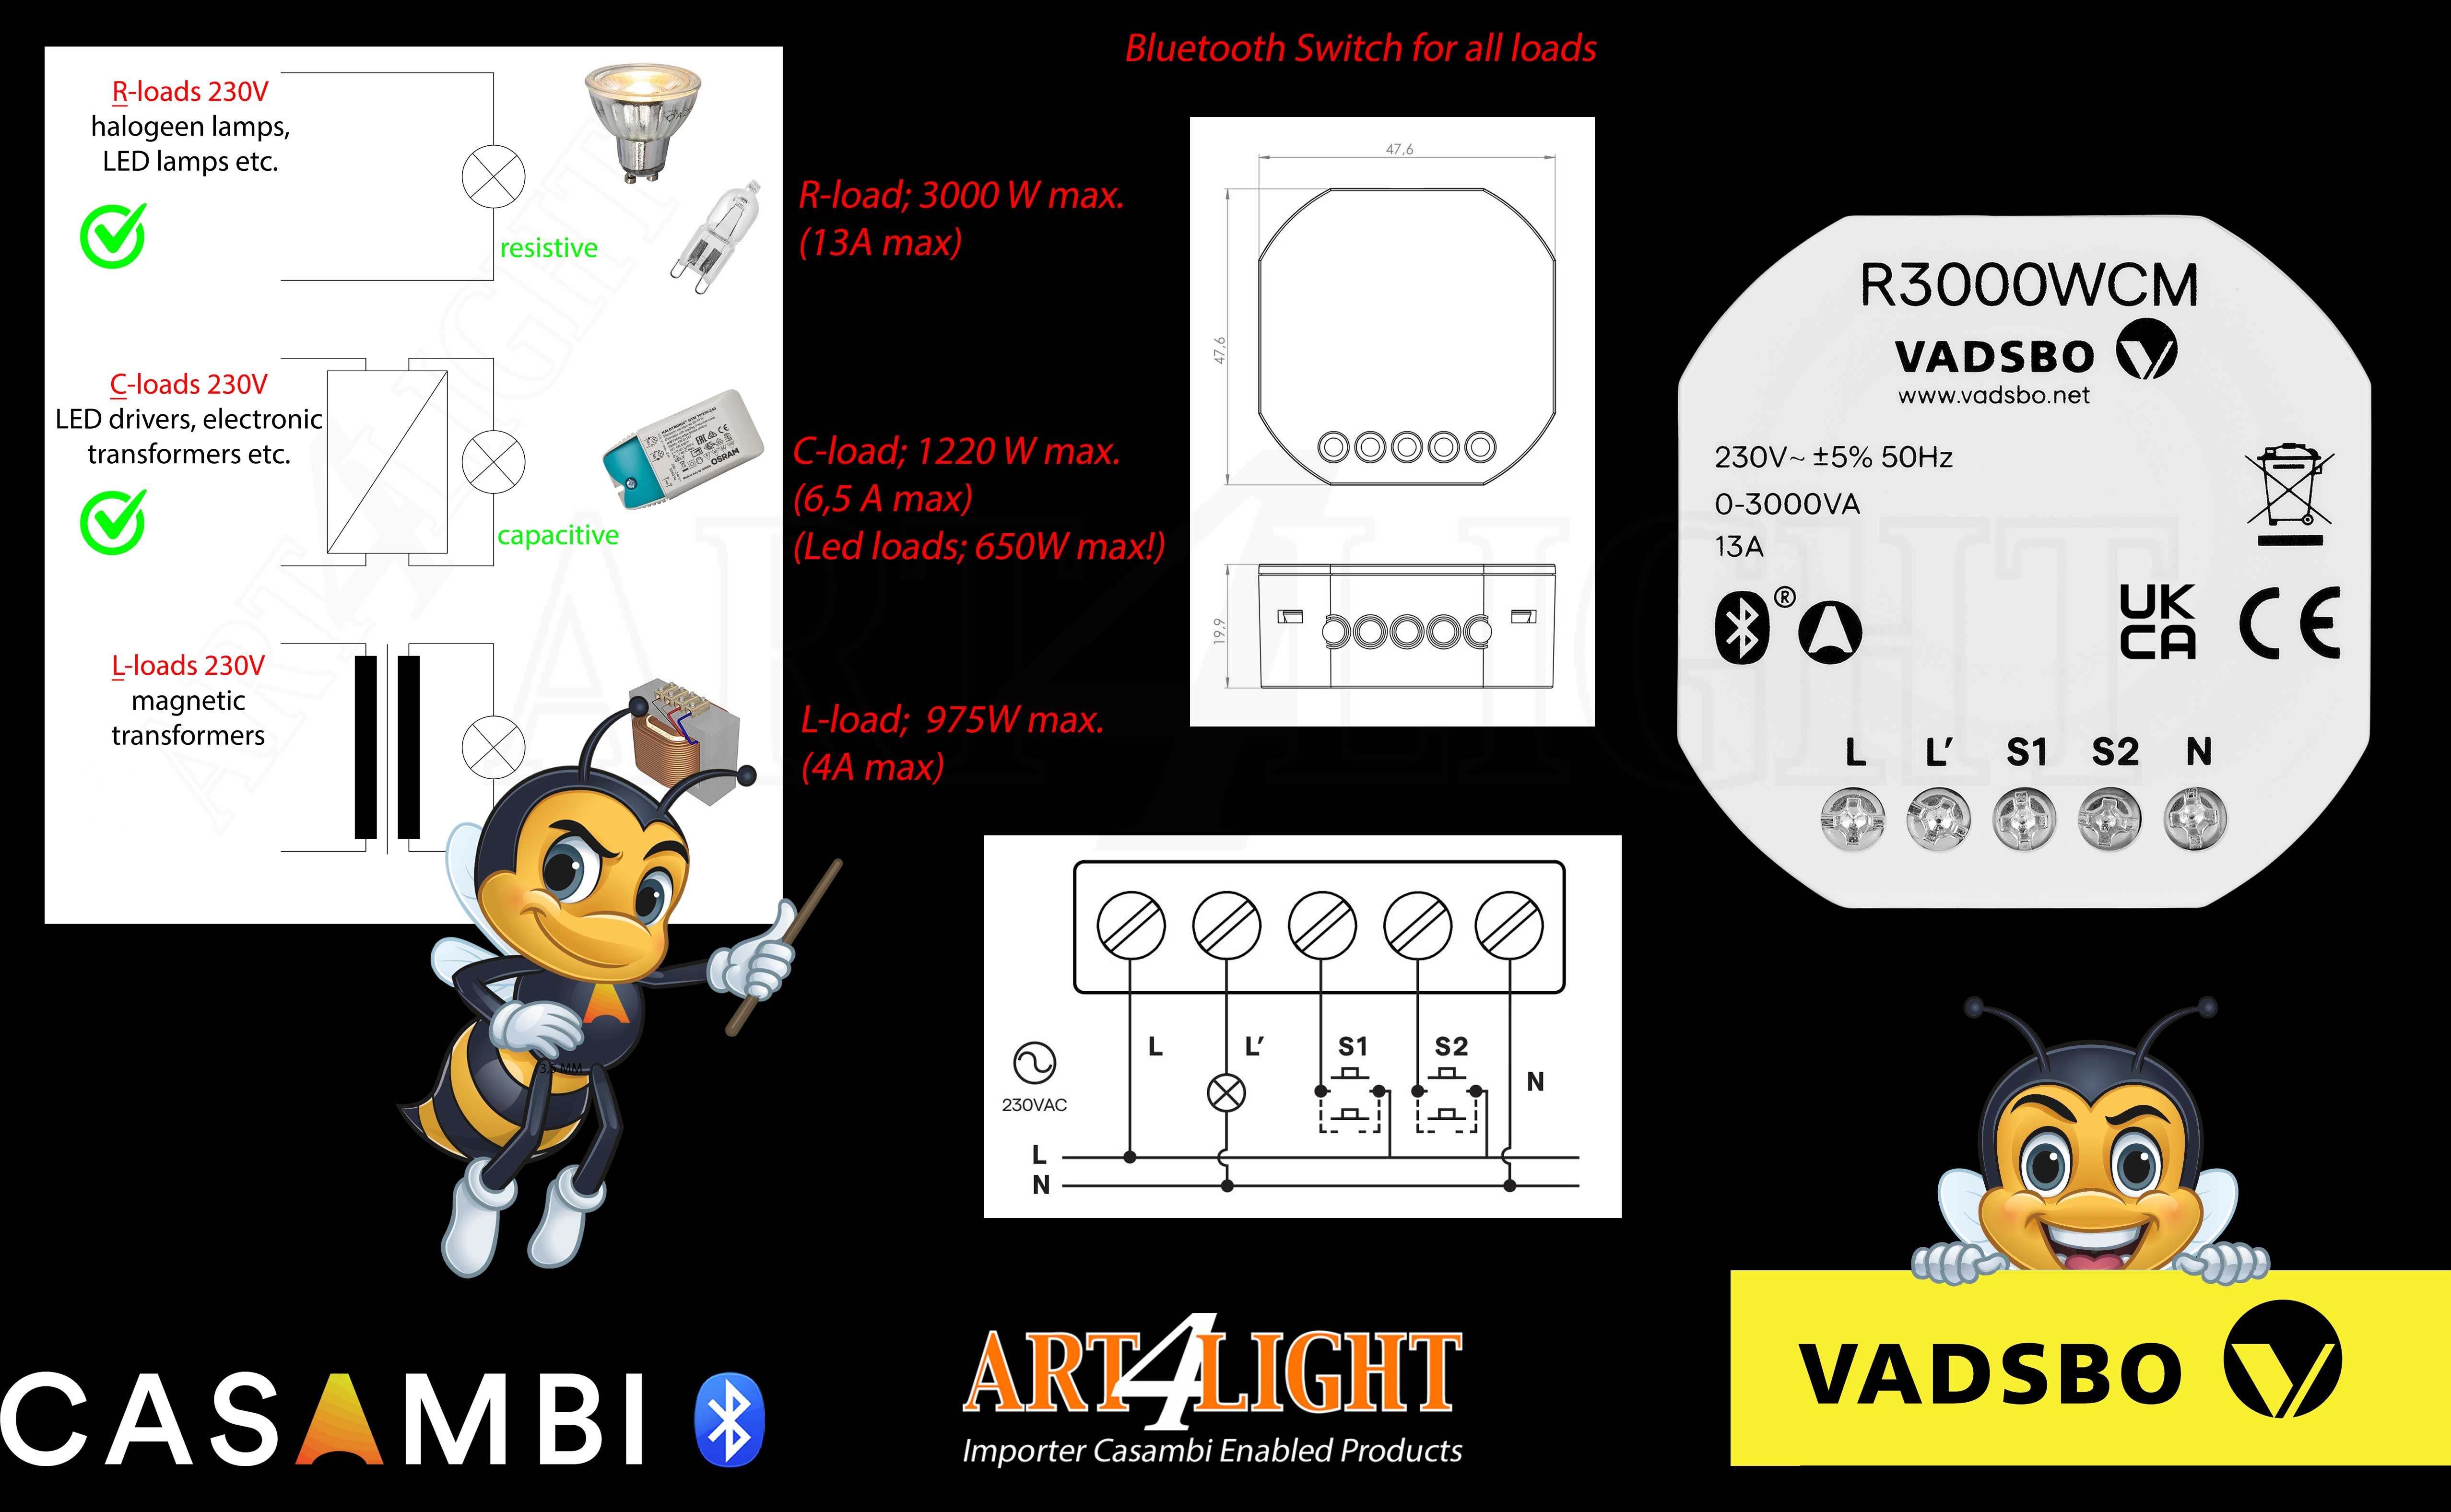 Overview-configuration-Vadsbo-R3000-WCM